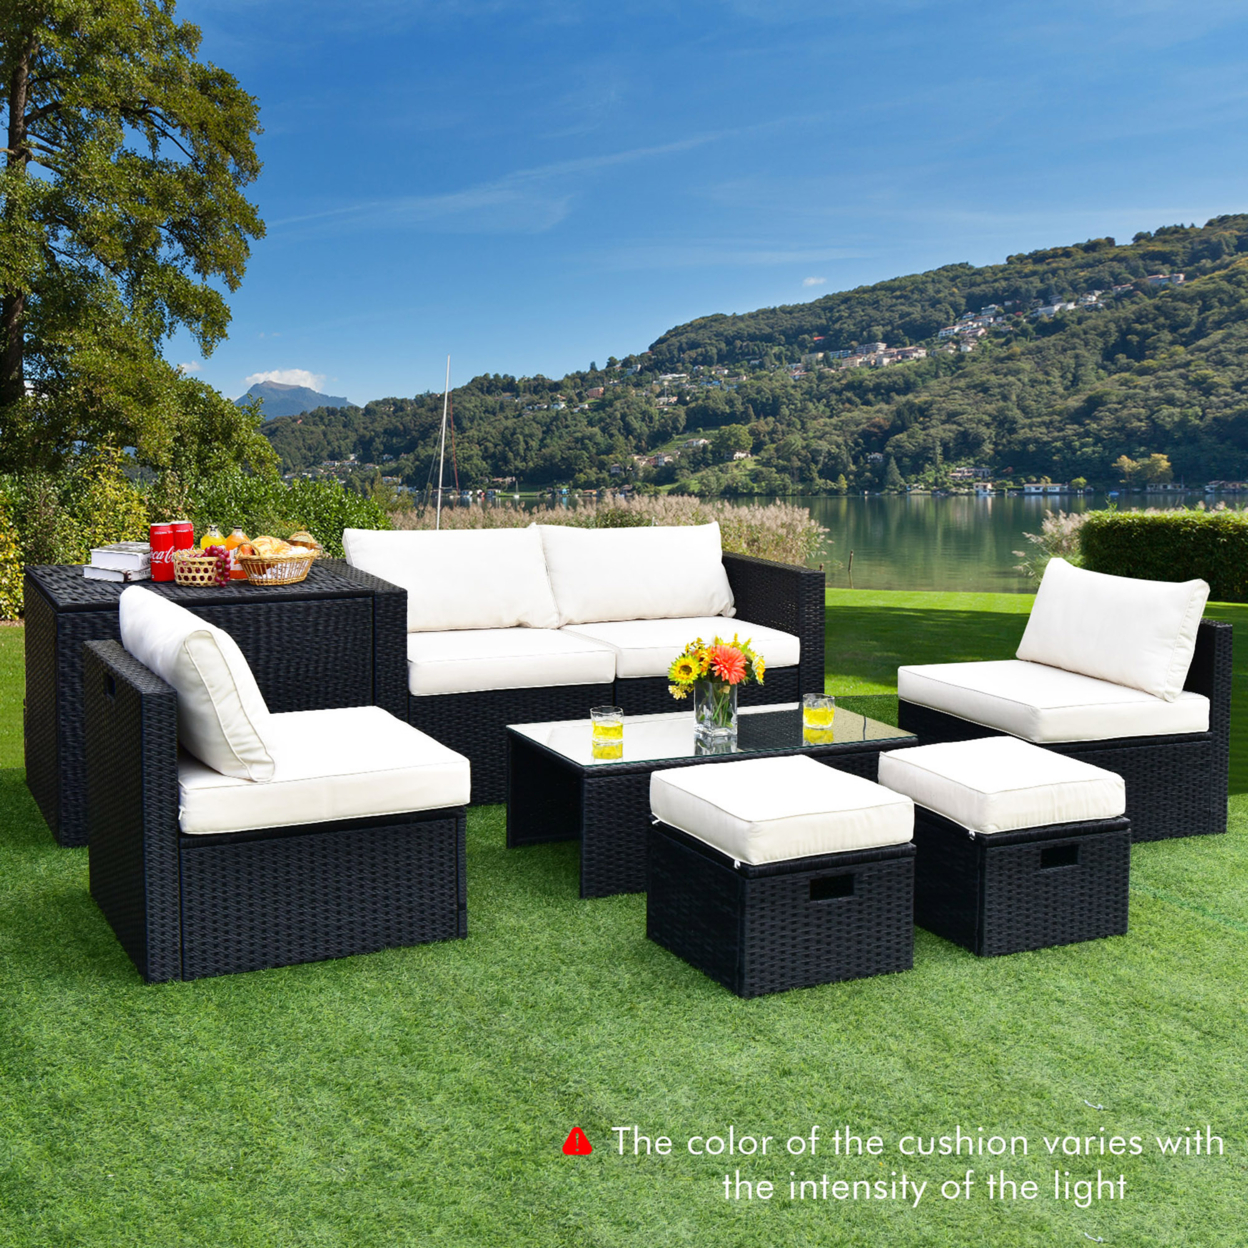 8PCS Rattan Patio Sectional Furniture Set W/ Waterproof Cover & Off White Cushions